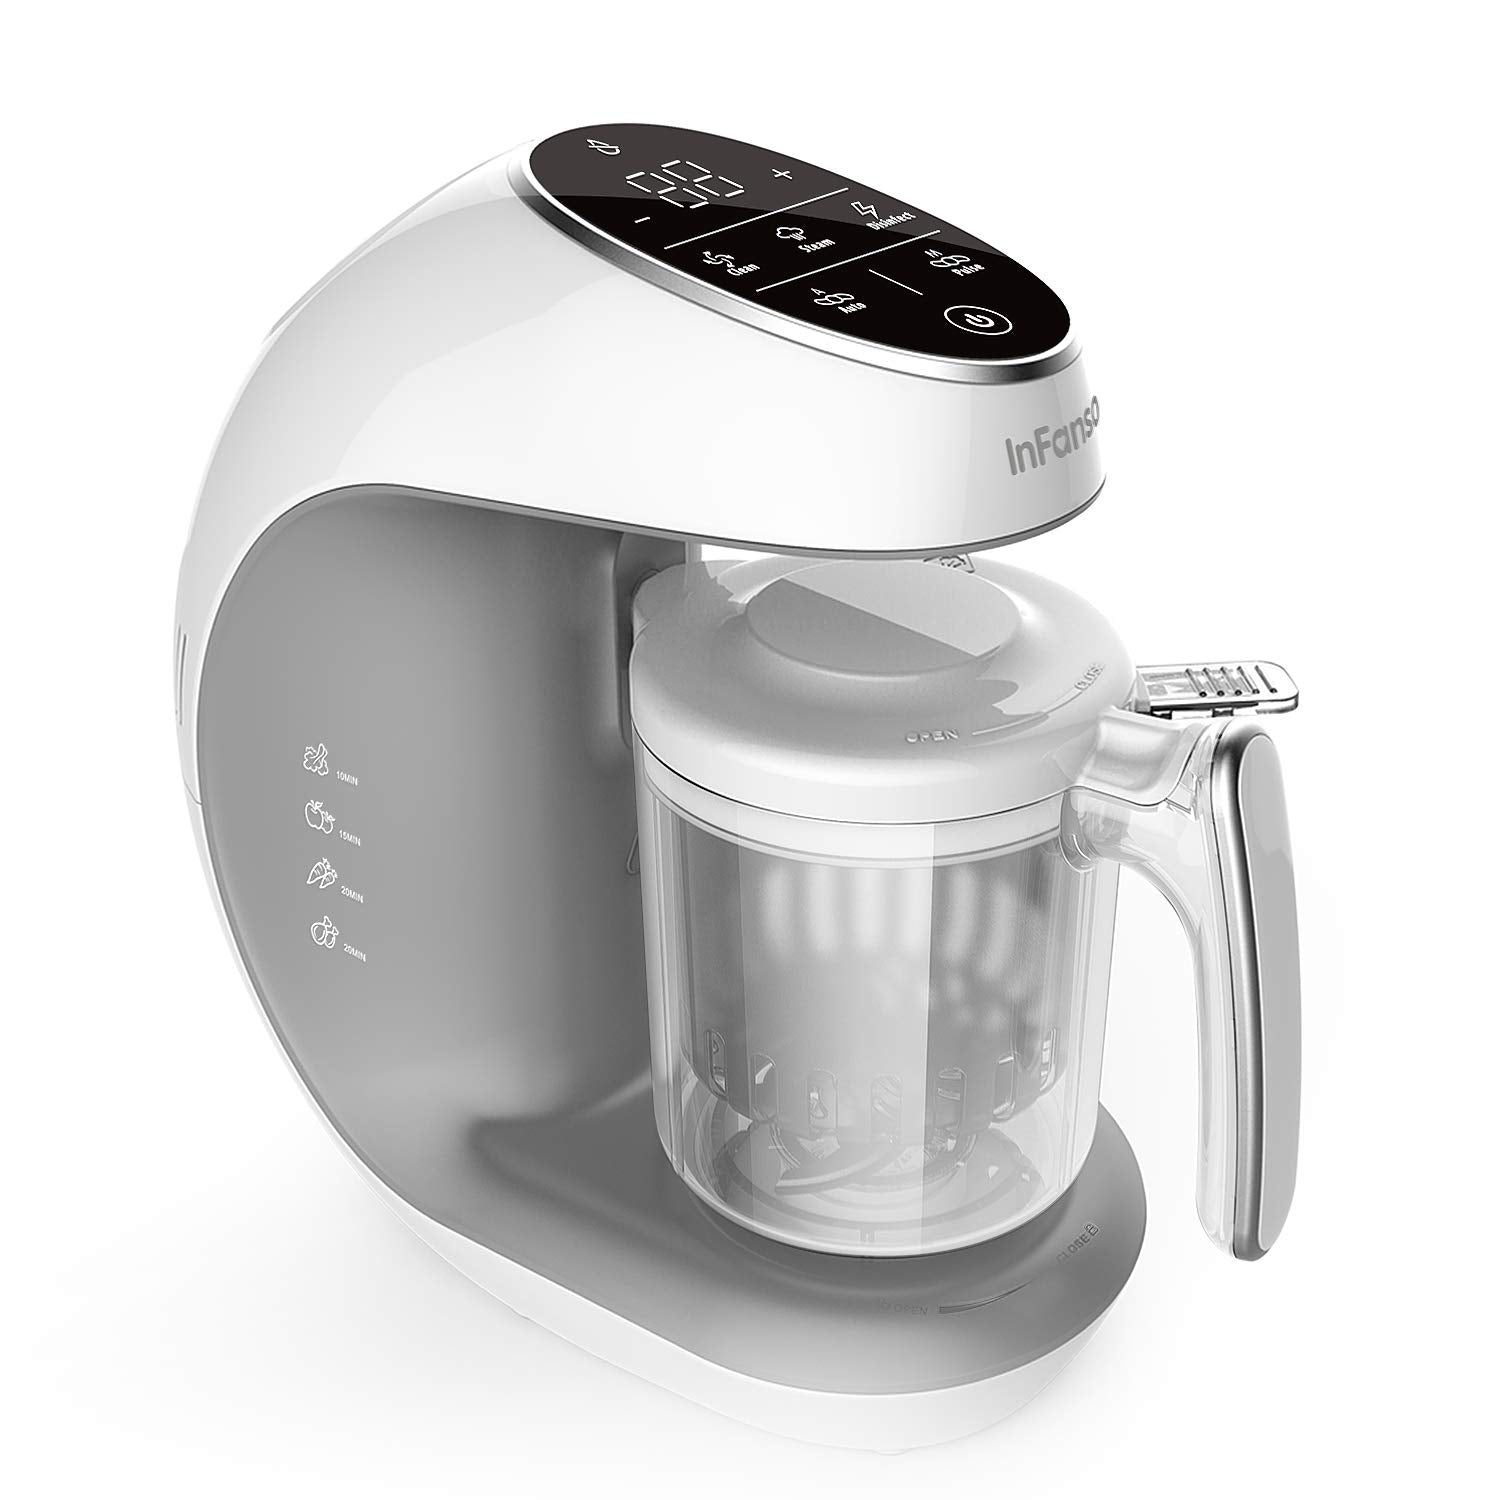 JFP300: 8-in-1 Blending, Steaming and Sterilizing Baby Food Processor   GOURMIA JR » JFP300: 8-in-1 Blending, Steaming and Sterilizing Baby Food  Processor